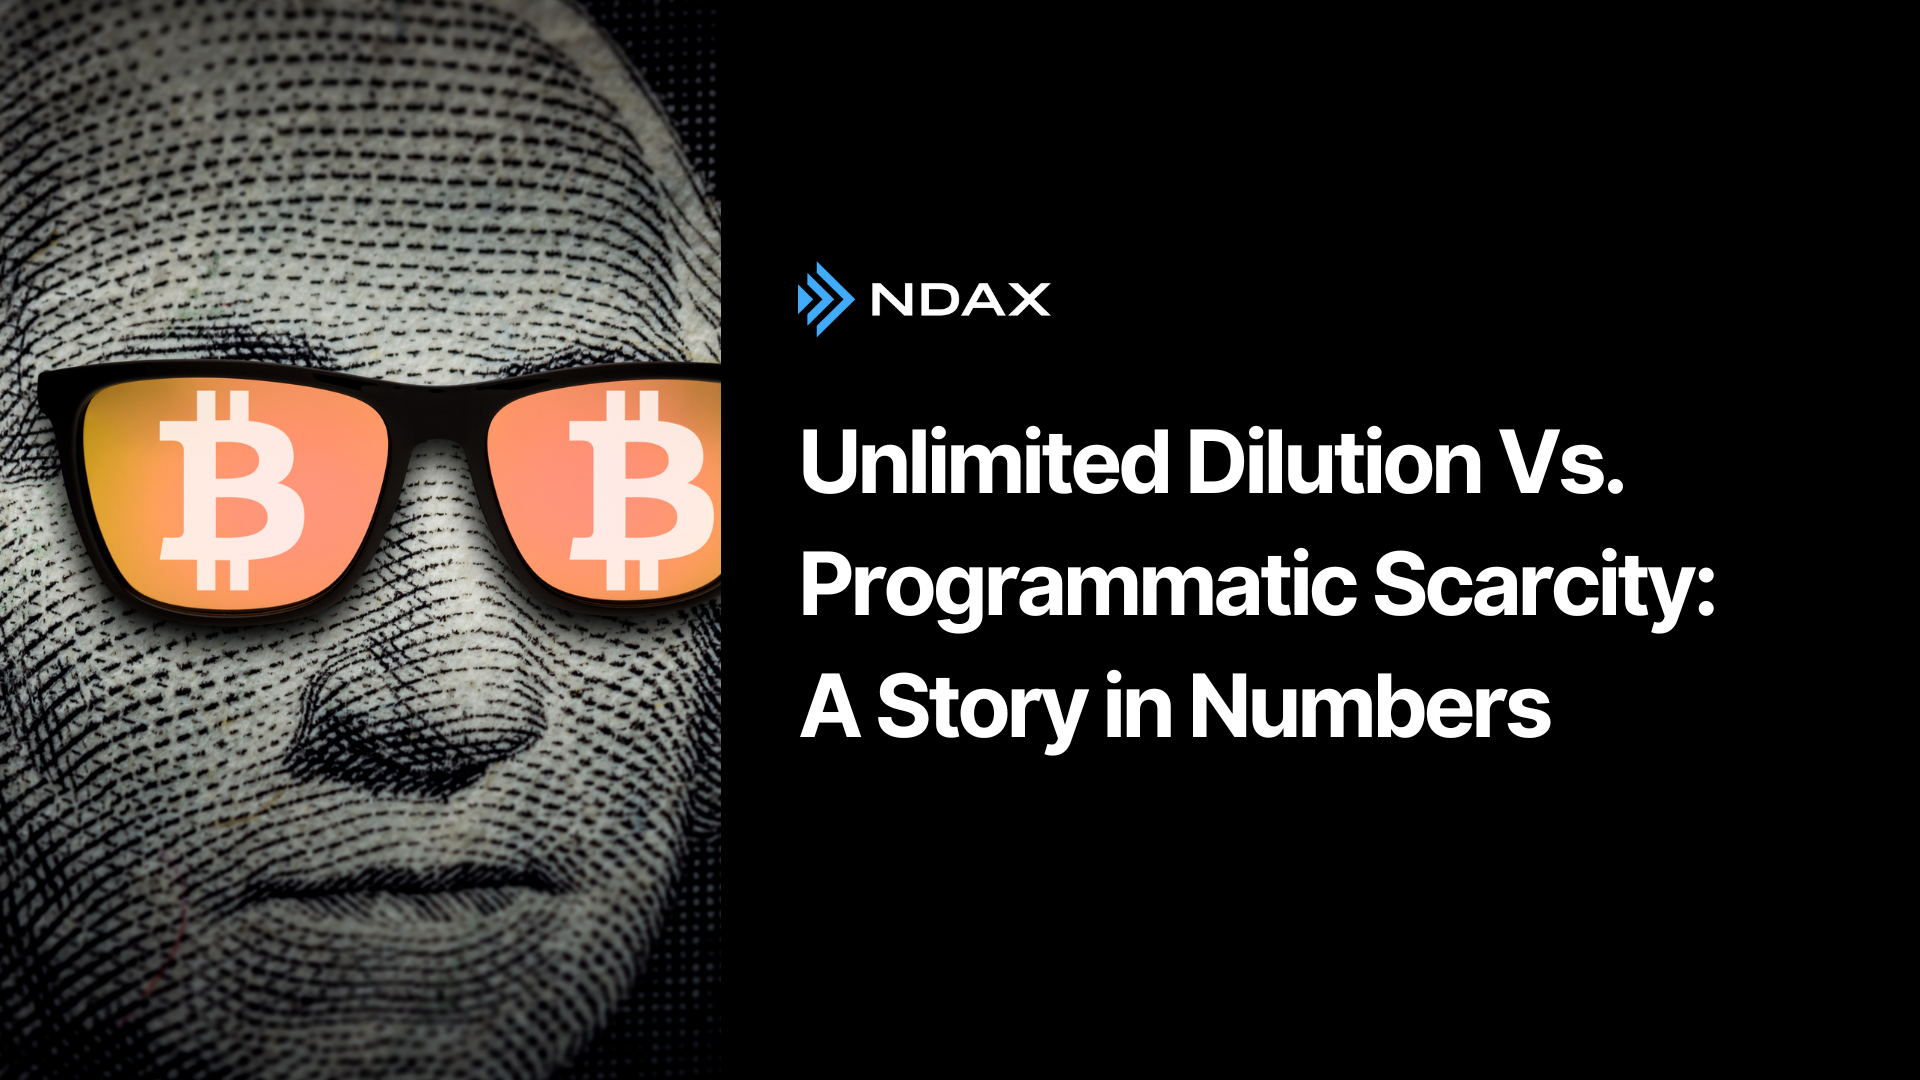 Unlimited Dilution Vs. Programmatic Scarcity: A Story in Numbers